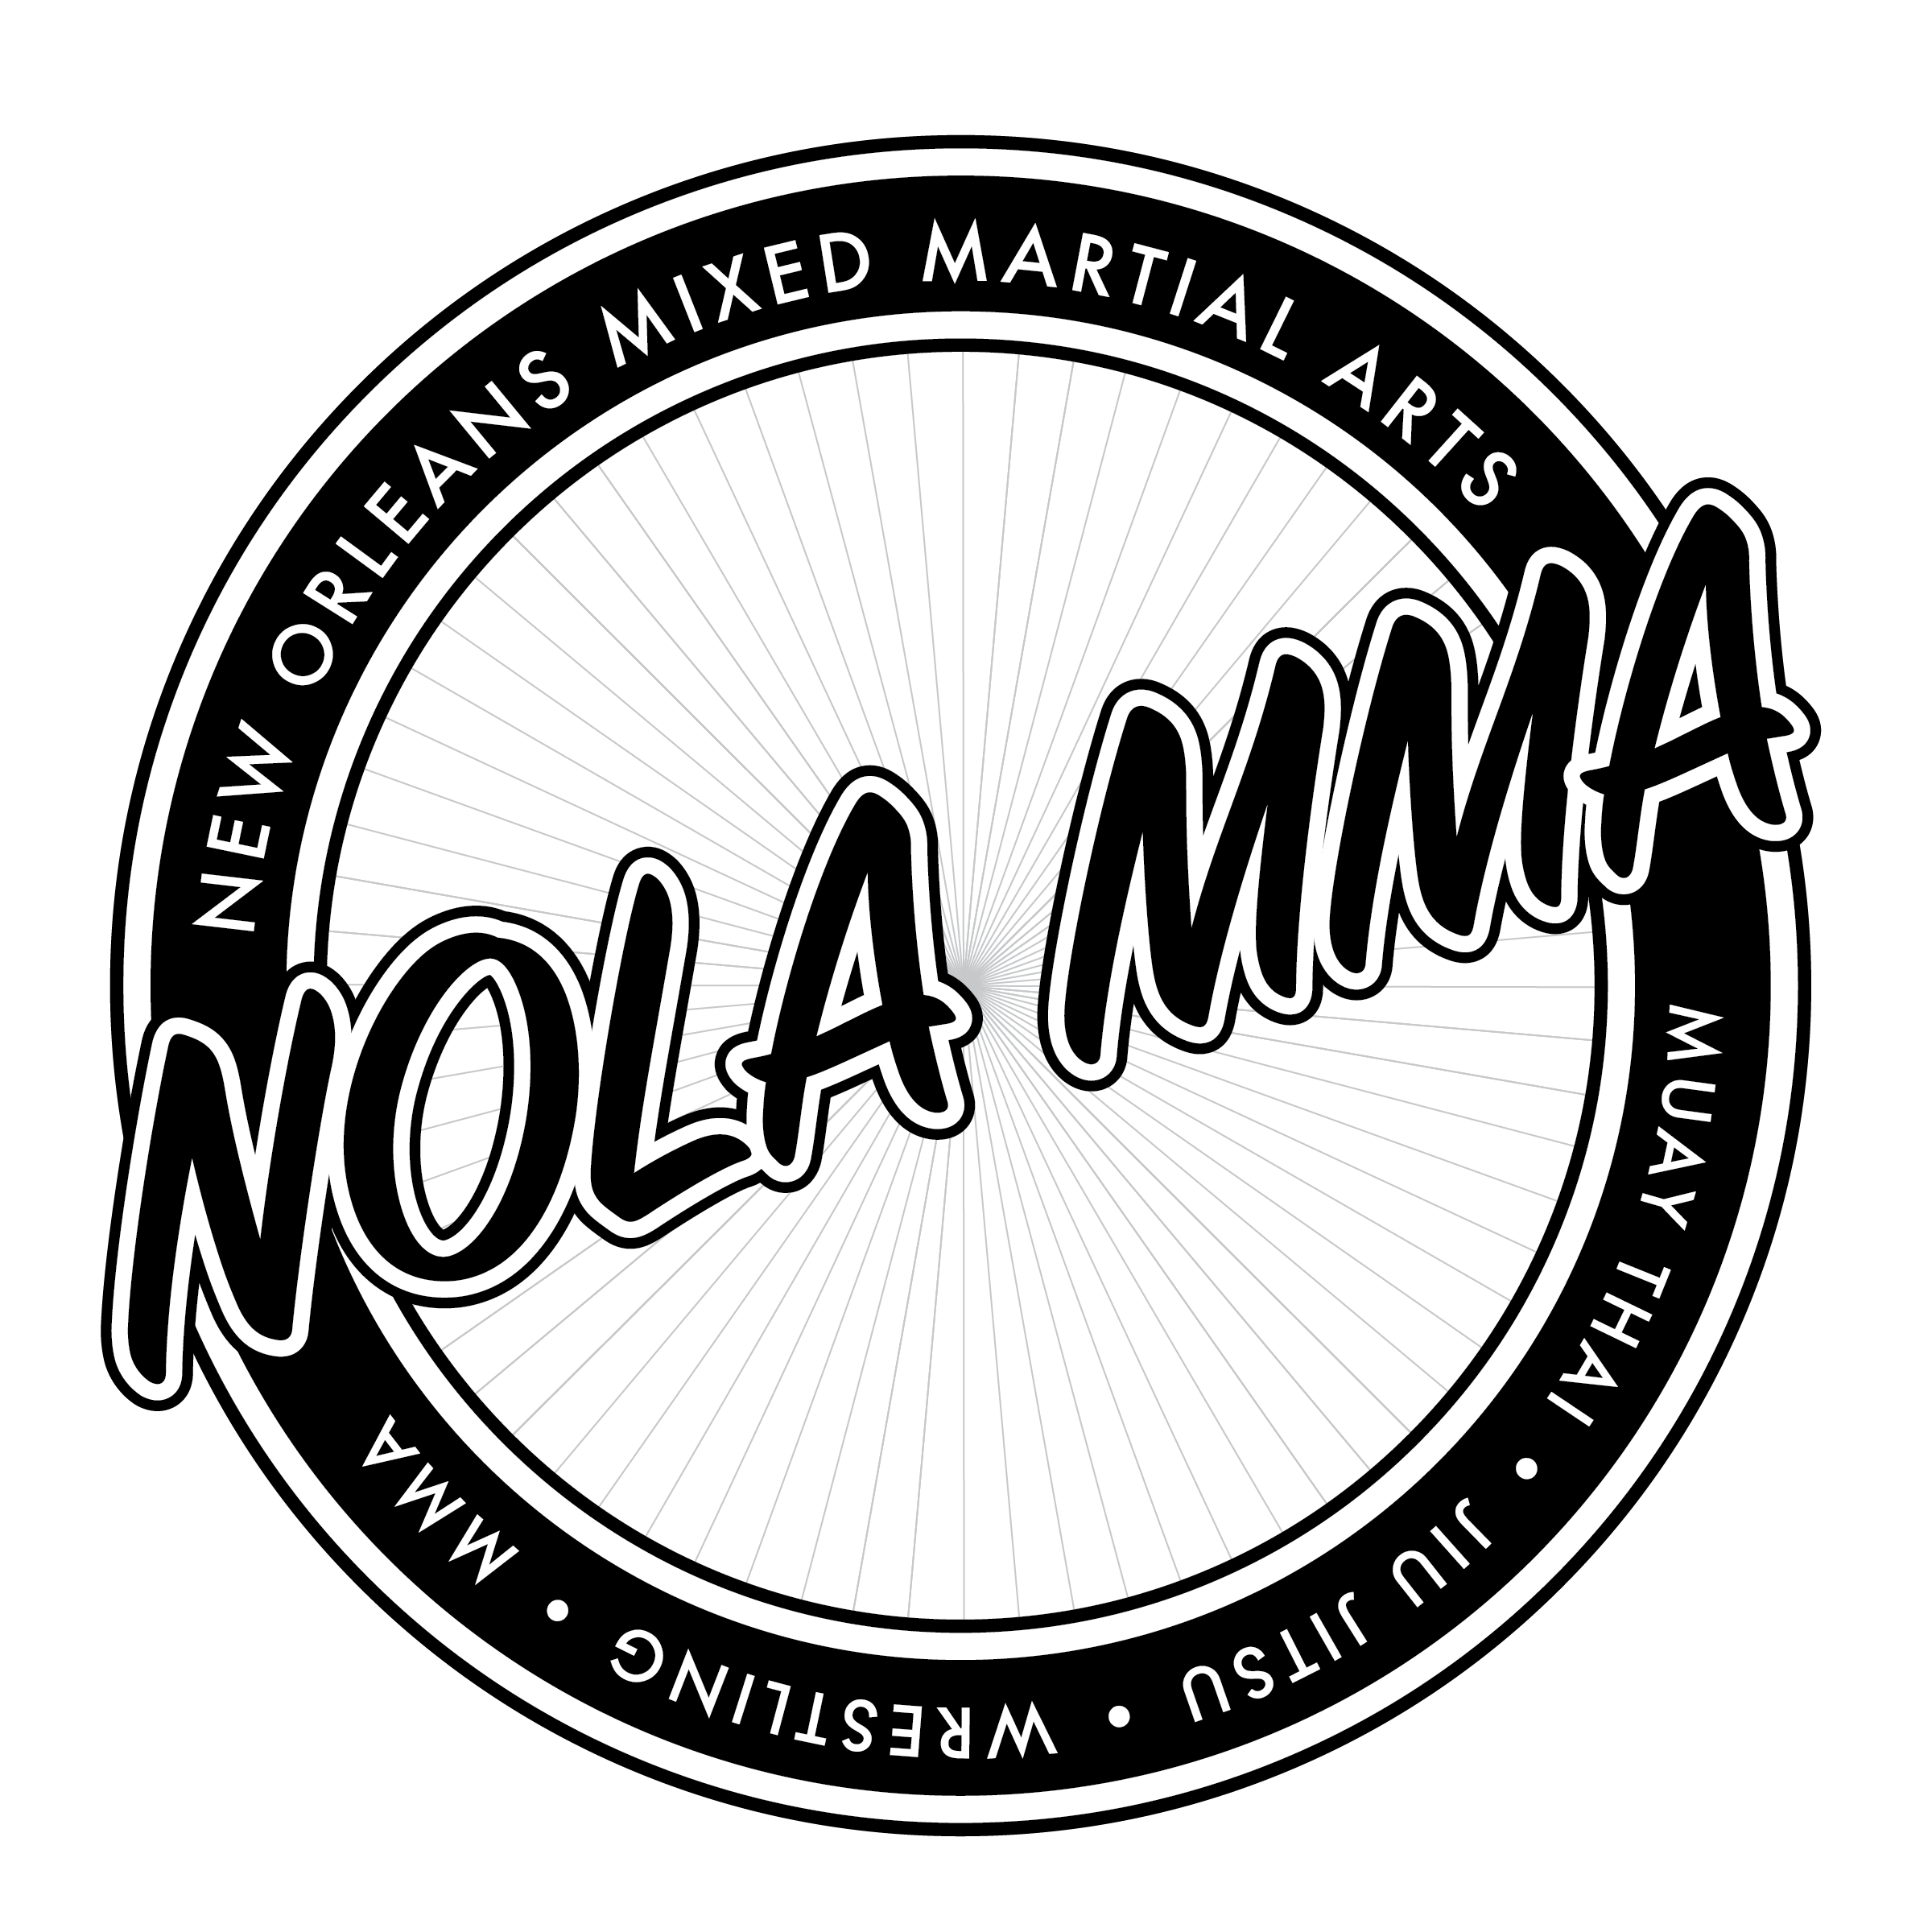 The #1 BJJ, Team In Texas with Muay Thai and MMA